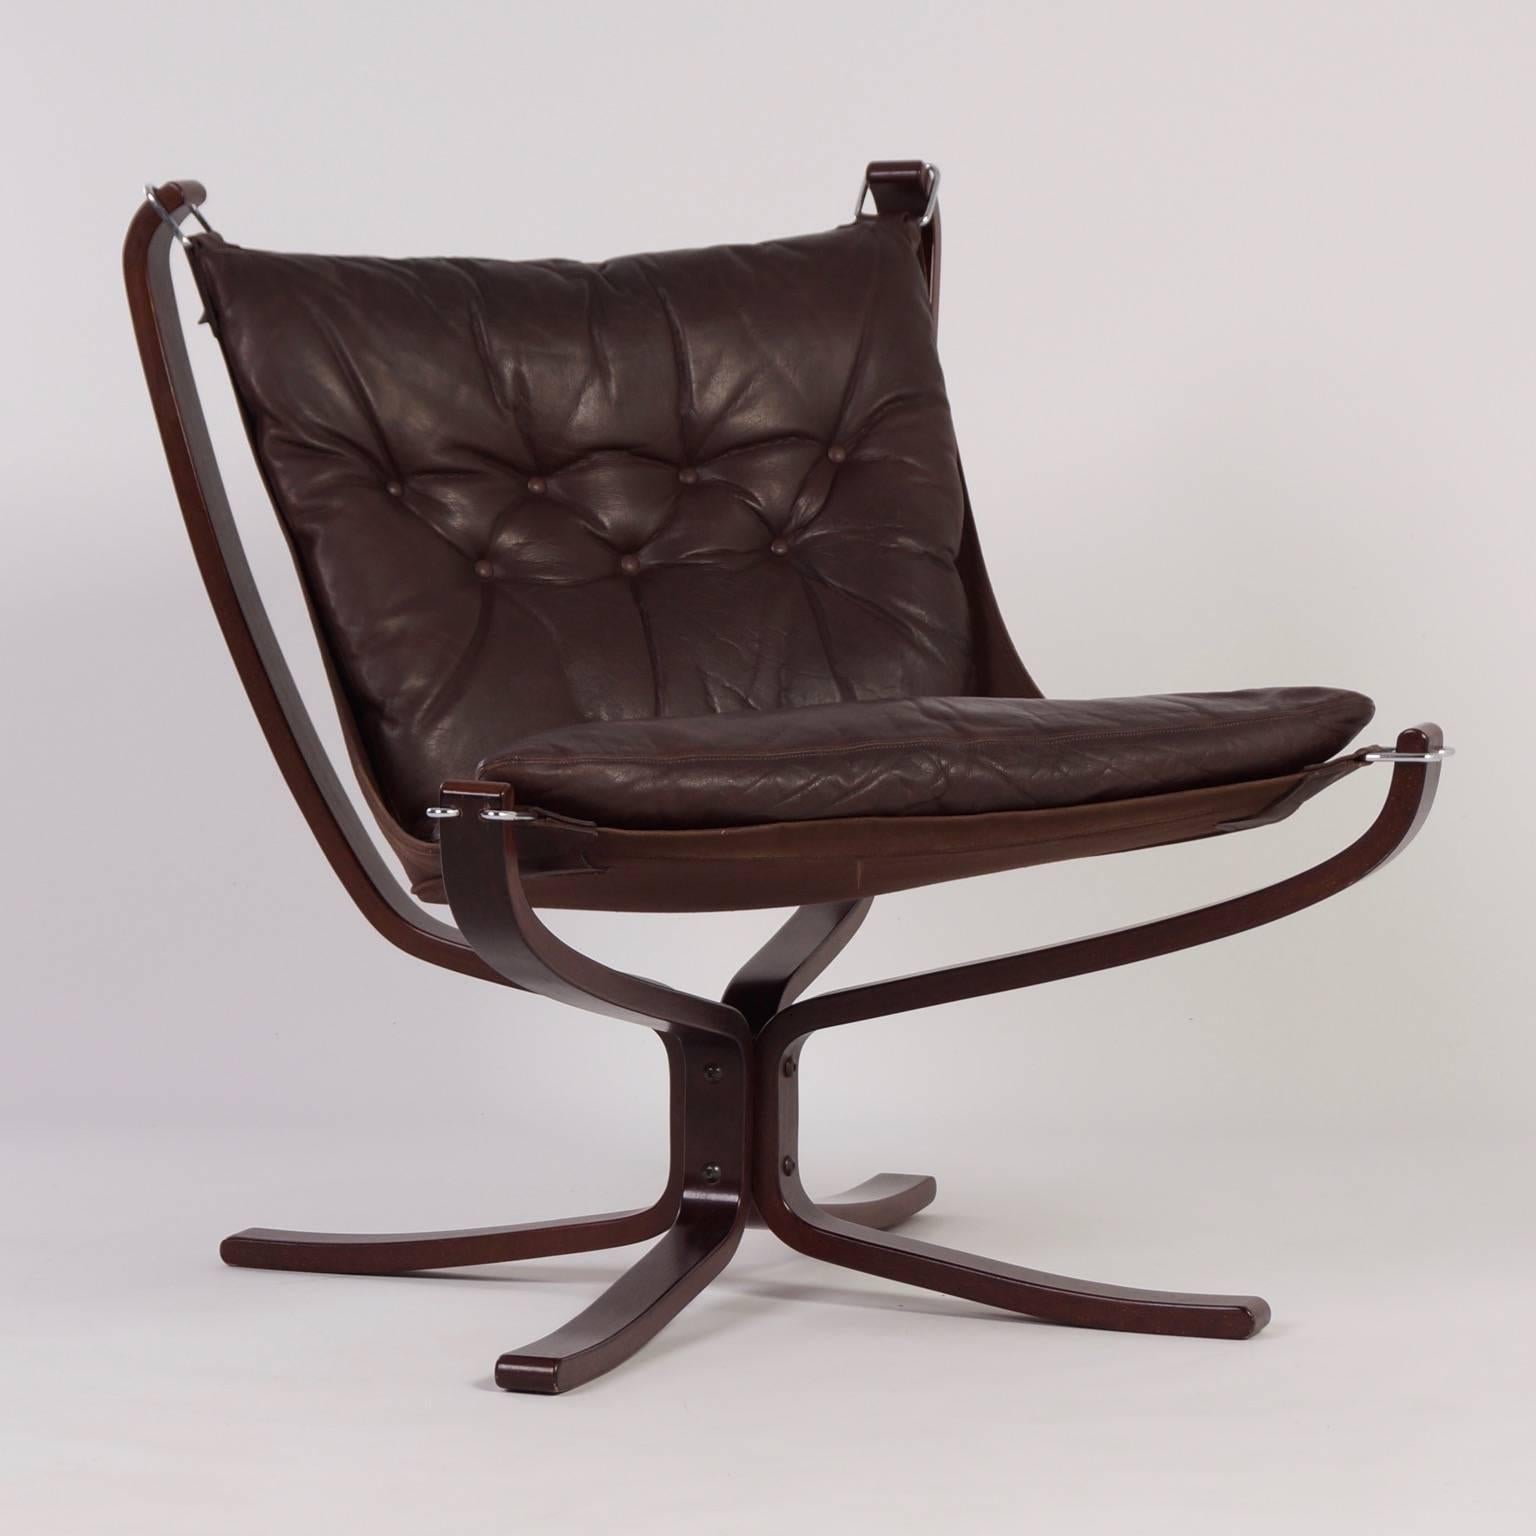 Scandinavian Falcon chair designed by Sigurd Ressell for Vatne Mobler in brown leather, circa 1974. This beautiful chair is still is very good and original condition. It is labelled with manufacturer and land of Origan (Norway).